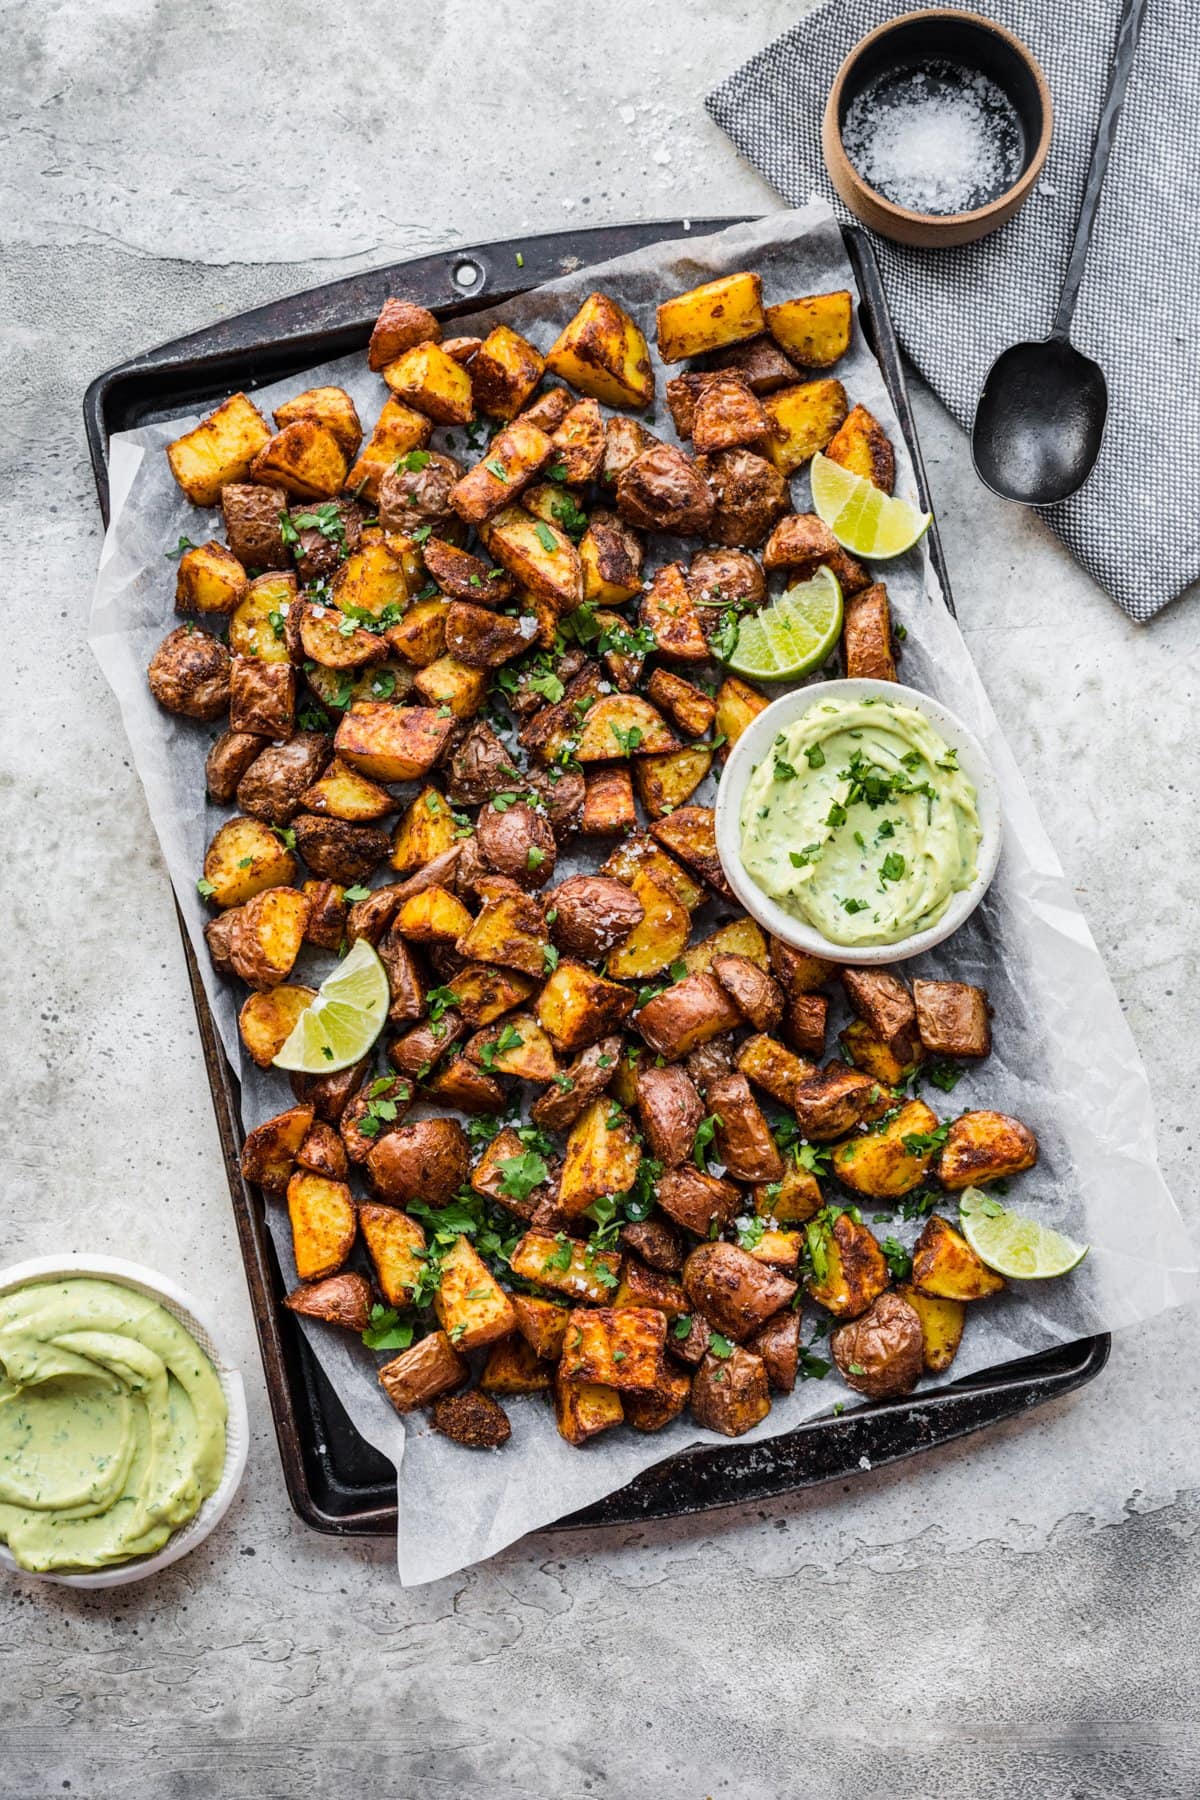 Overhead view of roasted mexican potatoes on a tray with an avocado crema.